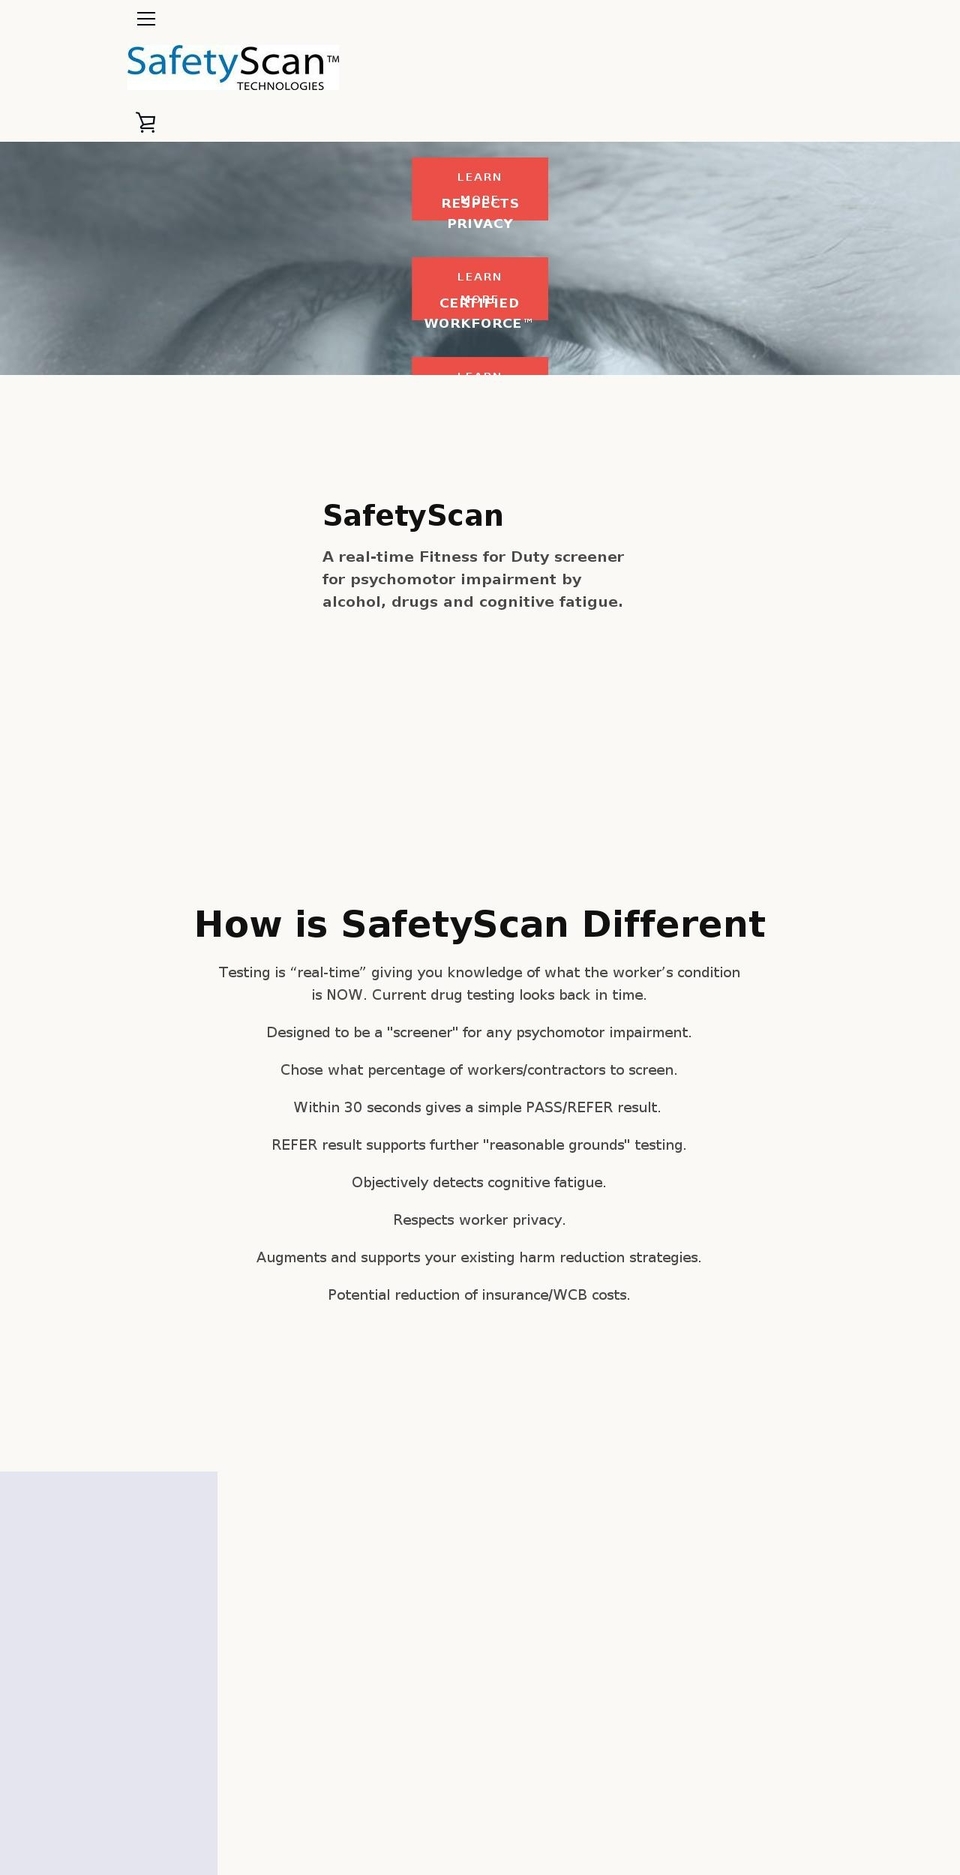 Copy of Narrative Shopify theme site example safetyscan-technologies.com